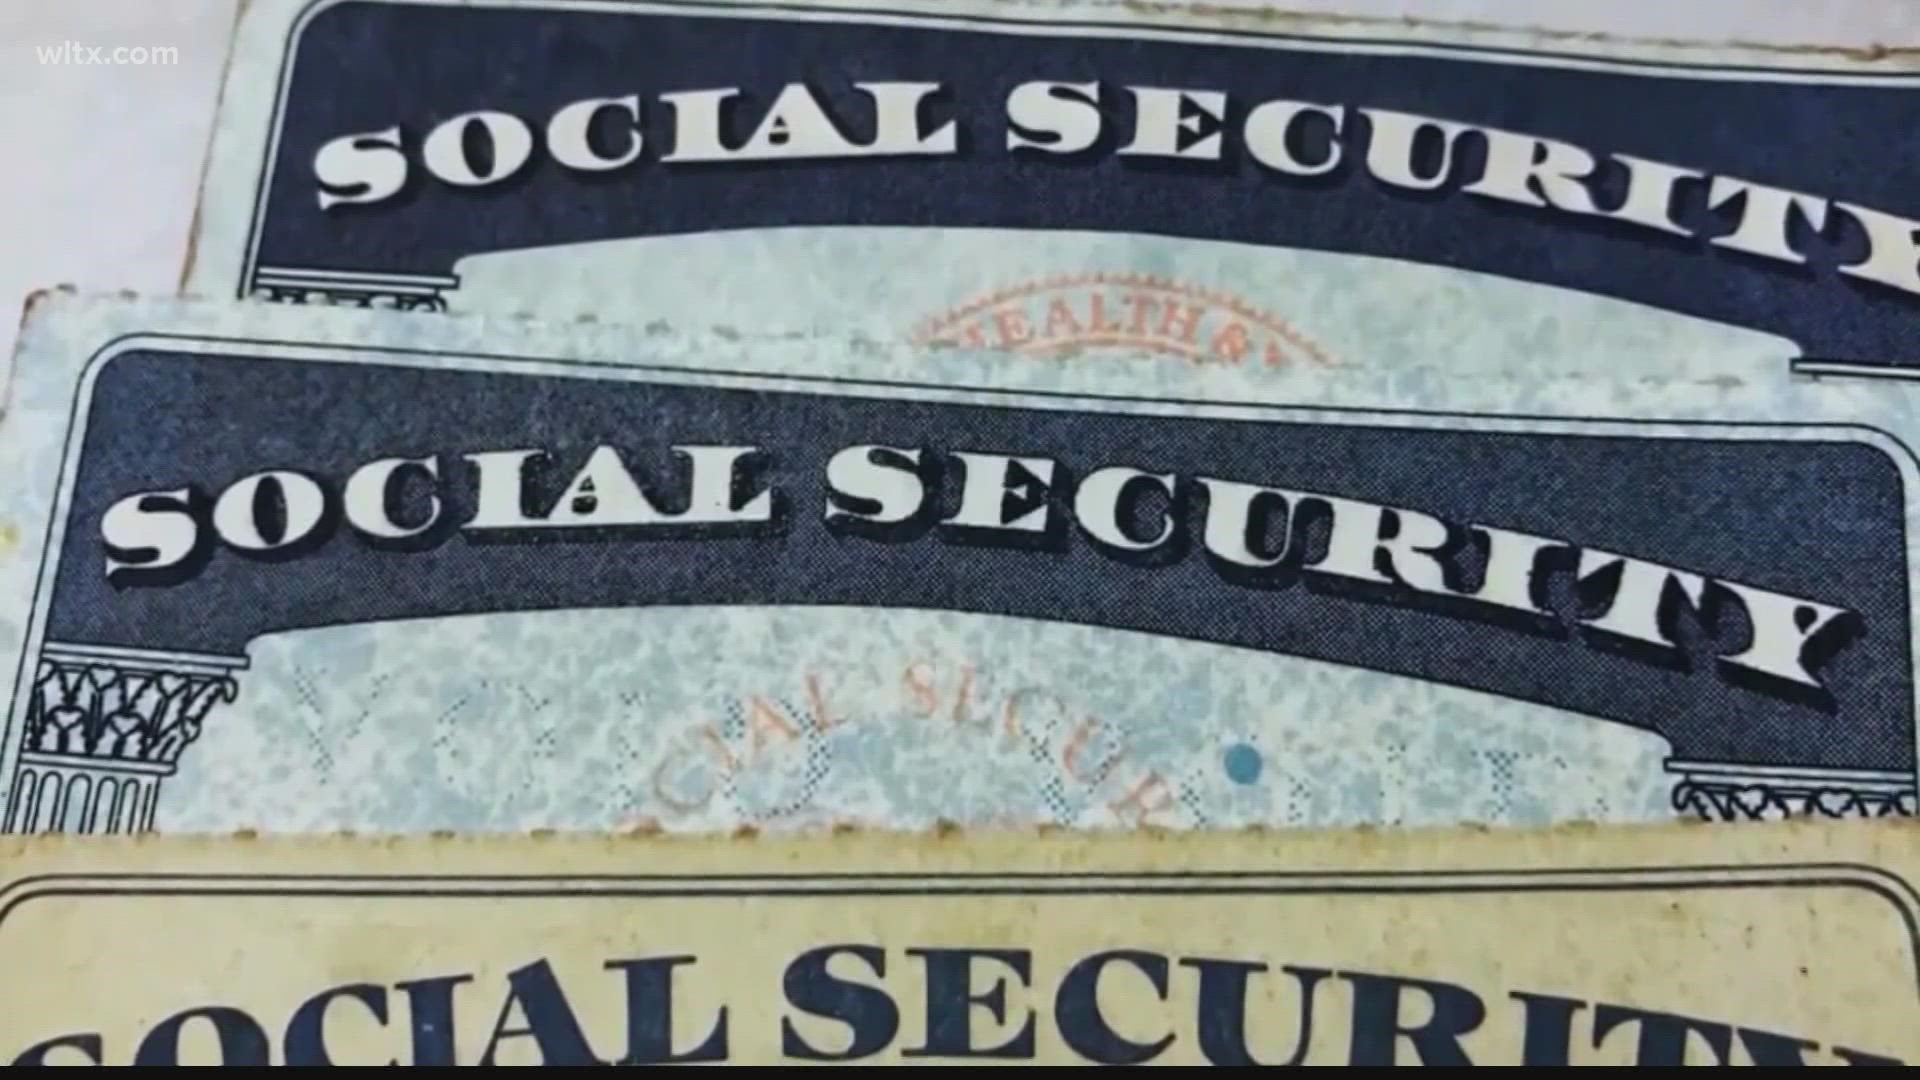 How much will Social Security go up in 2023?